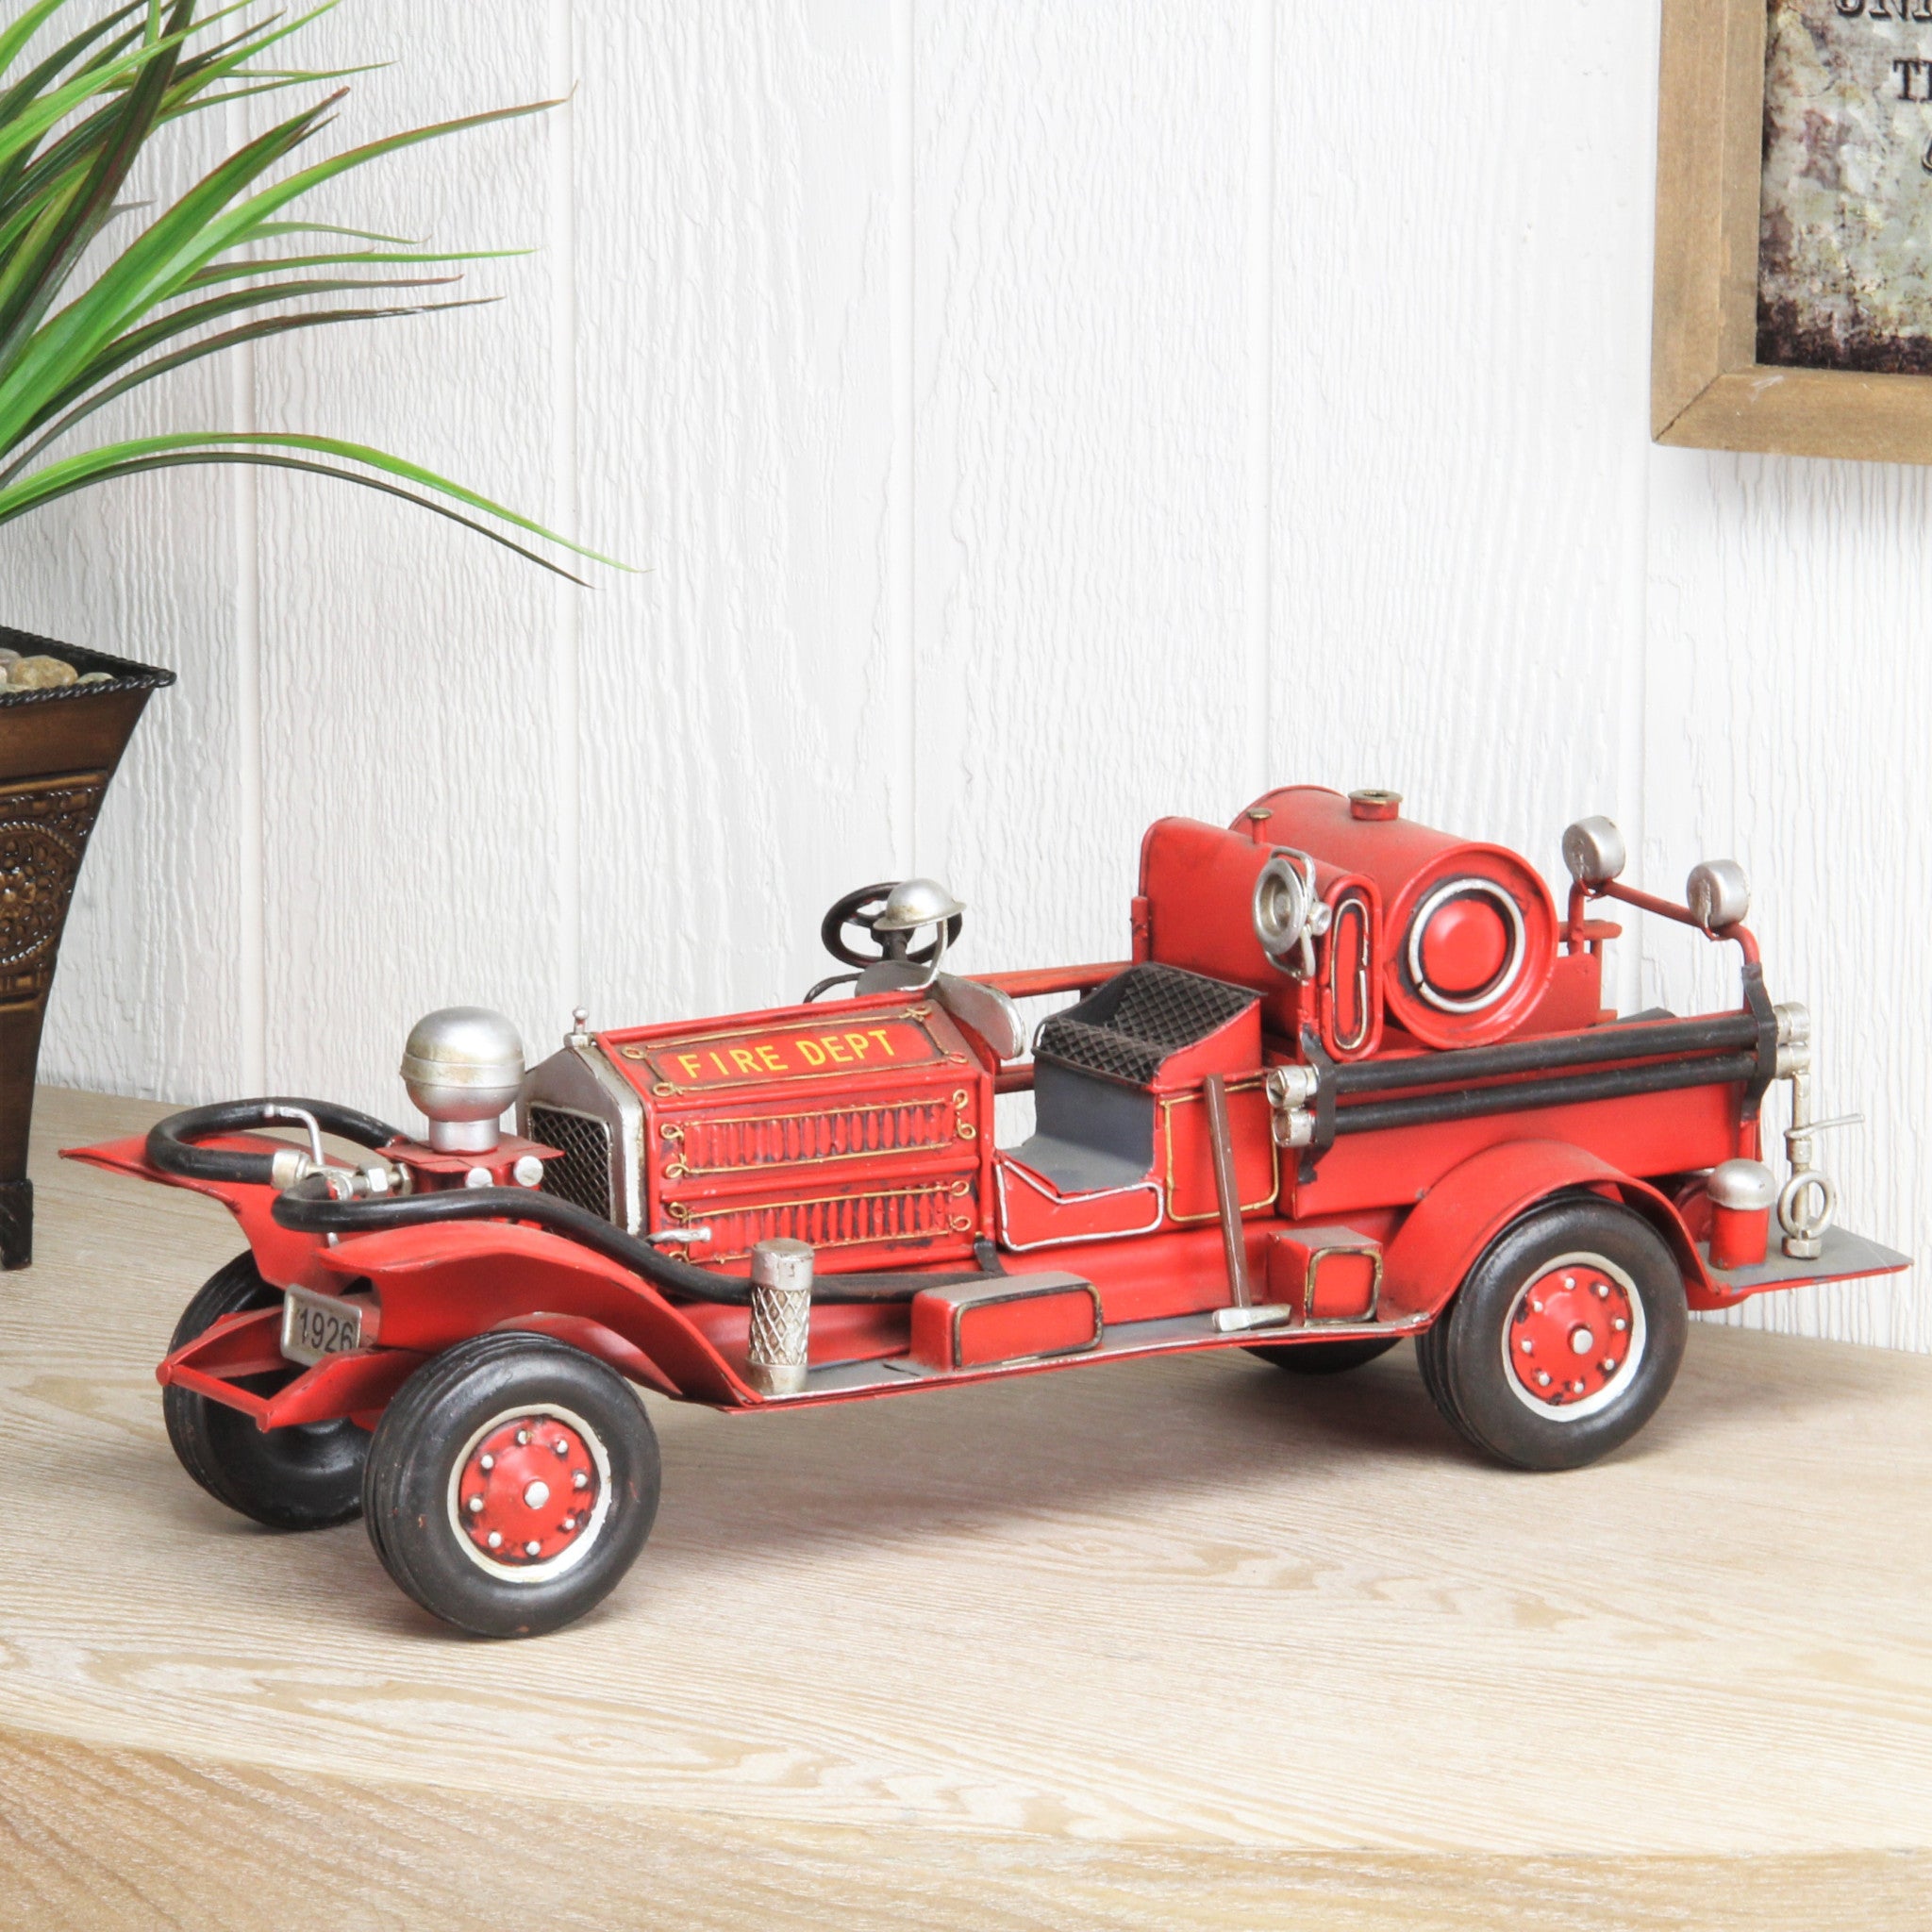 6" Red and Silver Metal Hand Painted Model Car